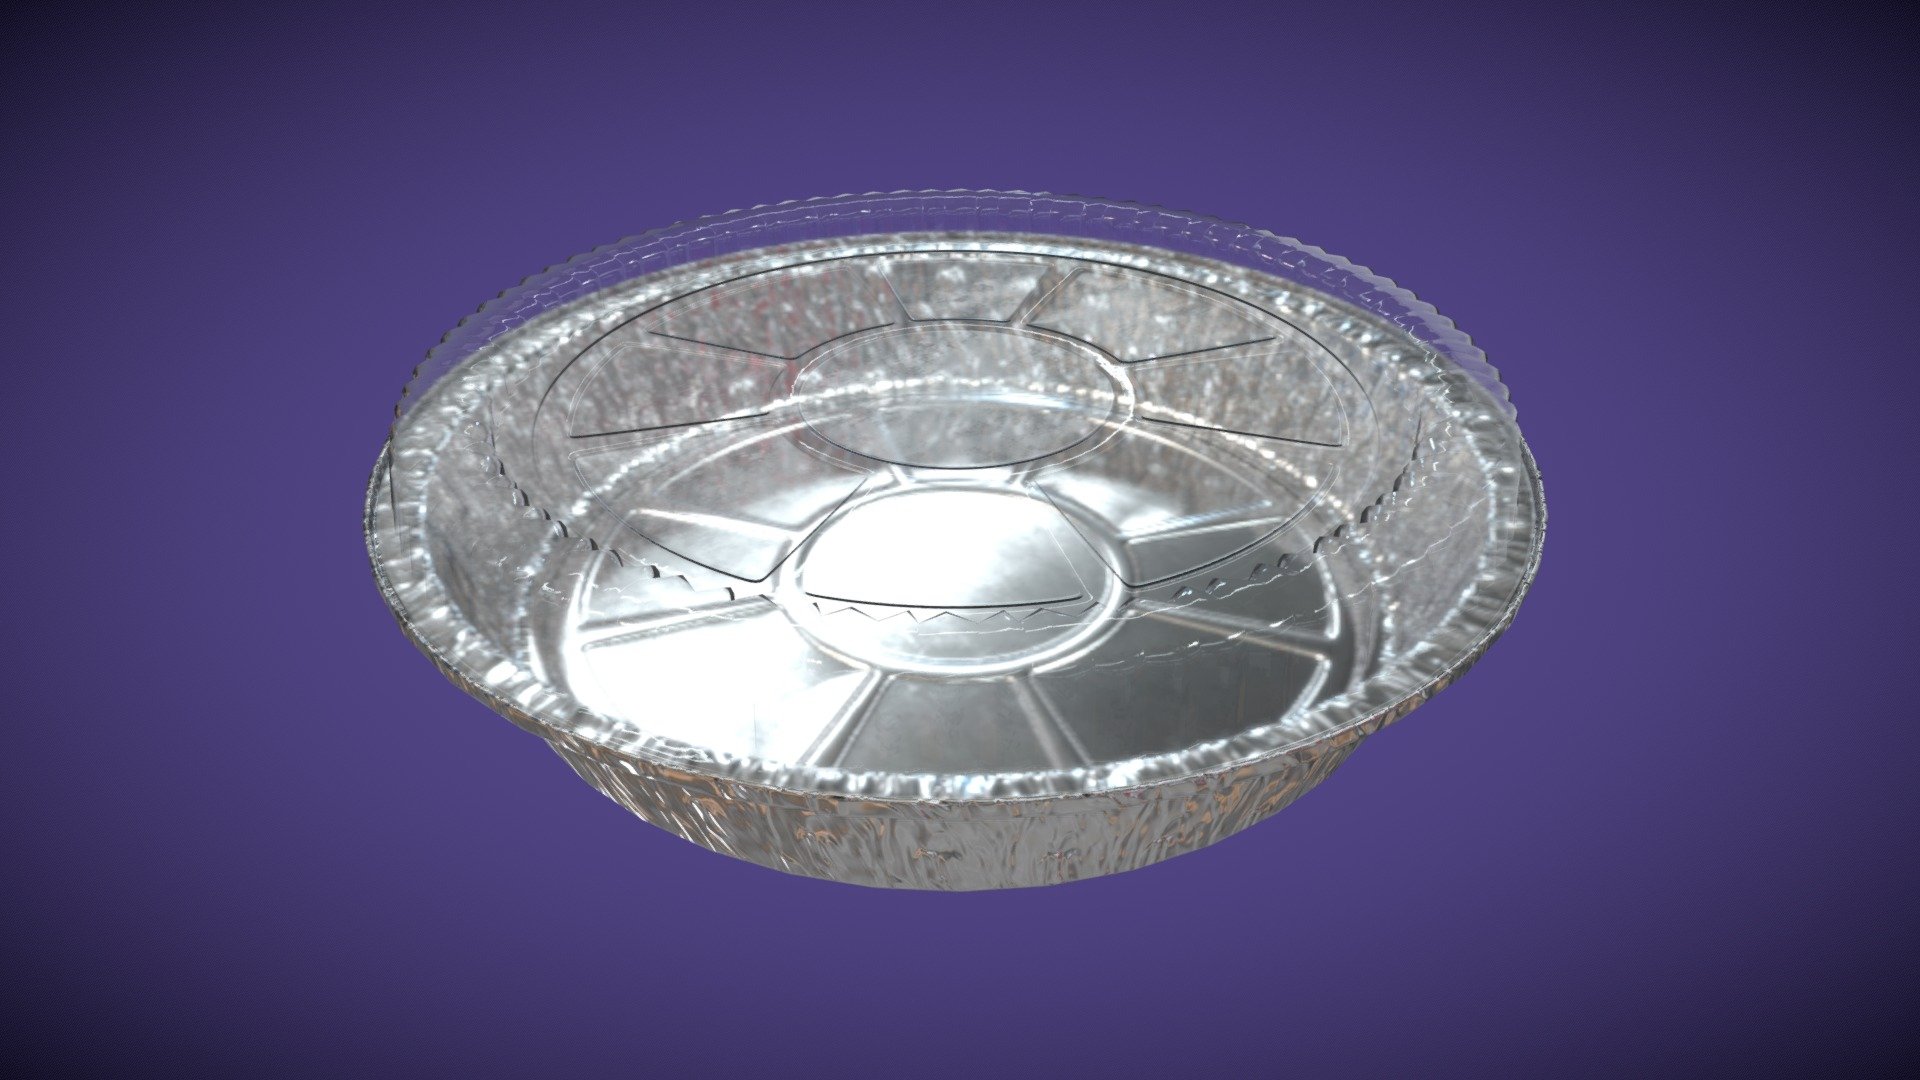 This is a 3D model of Round Aluminum Mold - Foil tray




Made in Blender 3.x (PBR Materials) and Rendering Cycles.

Main rendering made in Blender 3.x + Cycles using some HDR Environment Textures Images for lighting which is NOT provided in the package!

What does this package include?




3D Modeling of Round Aluminum Mold

2K and 4K Textures (Base Color, Normal Map, Metallic ,Roughness, Ambient Occlusion)

Important notes




File format included - (Blend, FBX, OBJ, GLB, STL)

Texture size - 2K and 4K

Uvs non - overlapping

Polygon: Low poly

Centered at 0,0,0

In some formats may be needed to reassign textures and add HDR Environment Textures Images for lighting.

Not lights include

No special plugin needed to open the scene.

If you like my work, please leave your comment and like, it helps me a lot to create new content. If you have any questions or changes about colors or another thing, you can contact me at we3domodel@gmail.com - Round Aluminum Mold - Foil tray - Buy Royalty Free 3D model by We3Do (@we3DoModel) 3d model